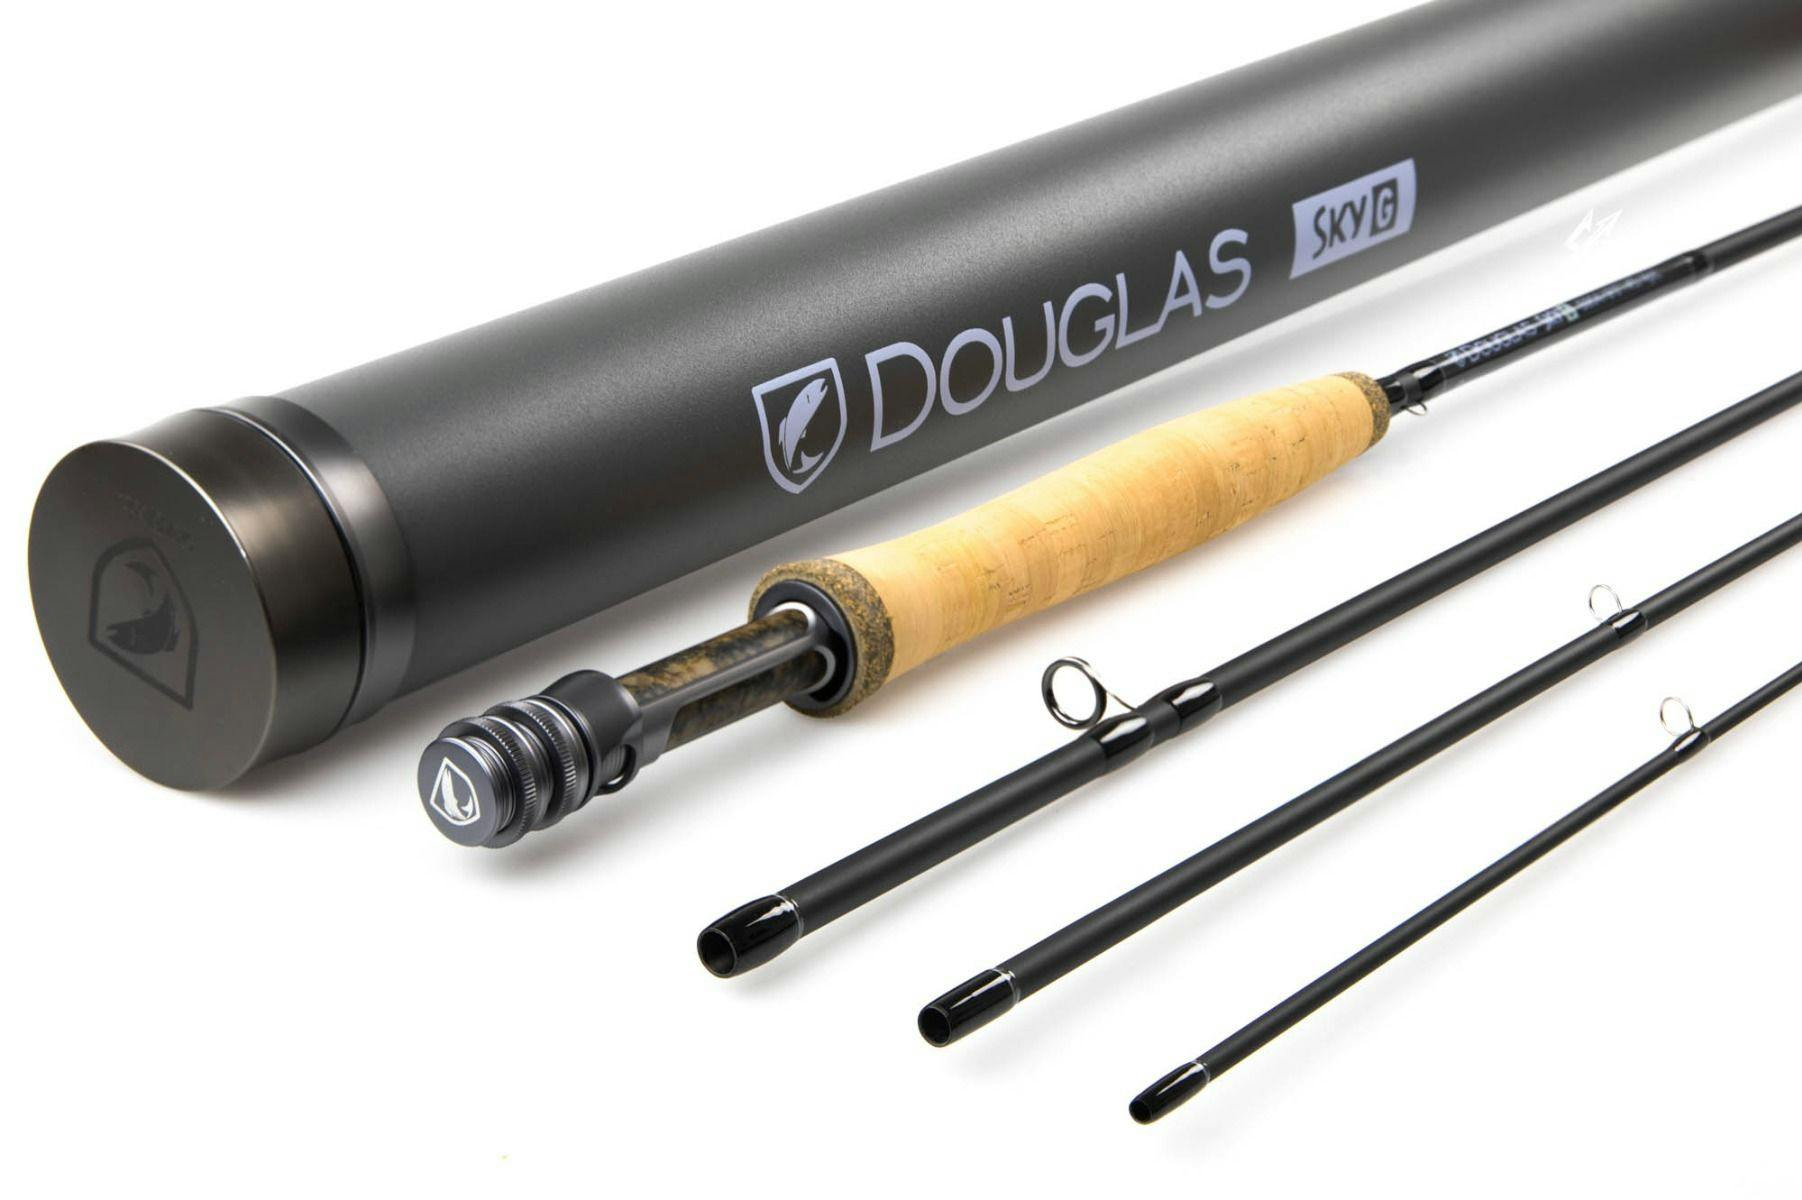 Product image of the Douglas SKY G Fly Rod.